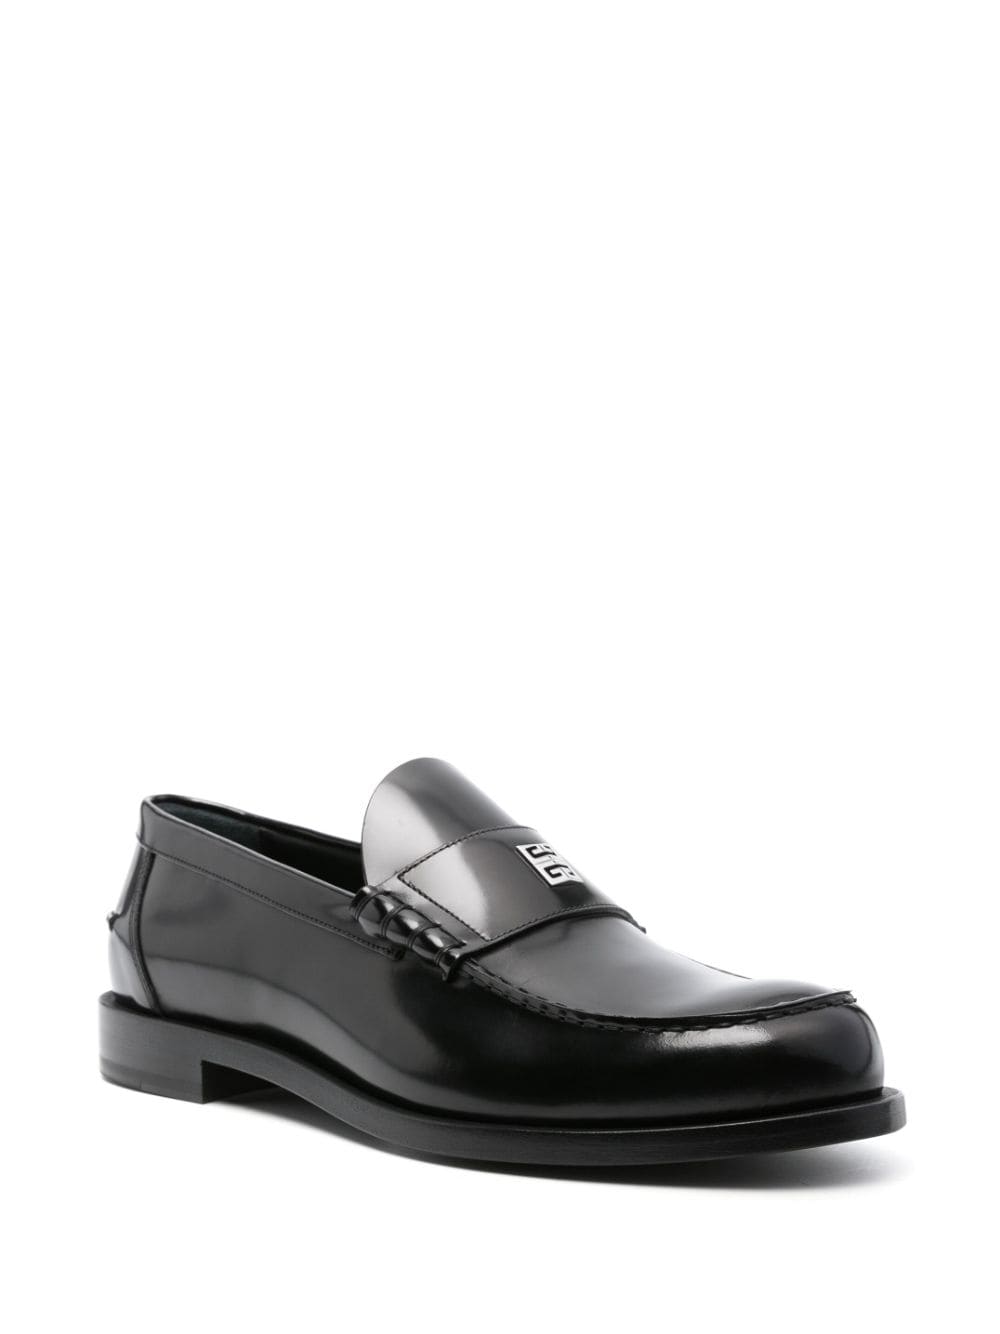 Givenchy Flat Shoes Black